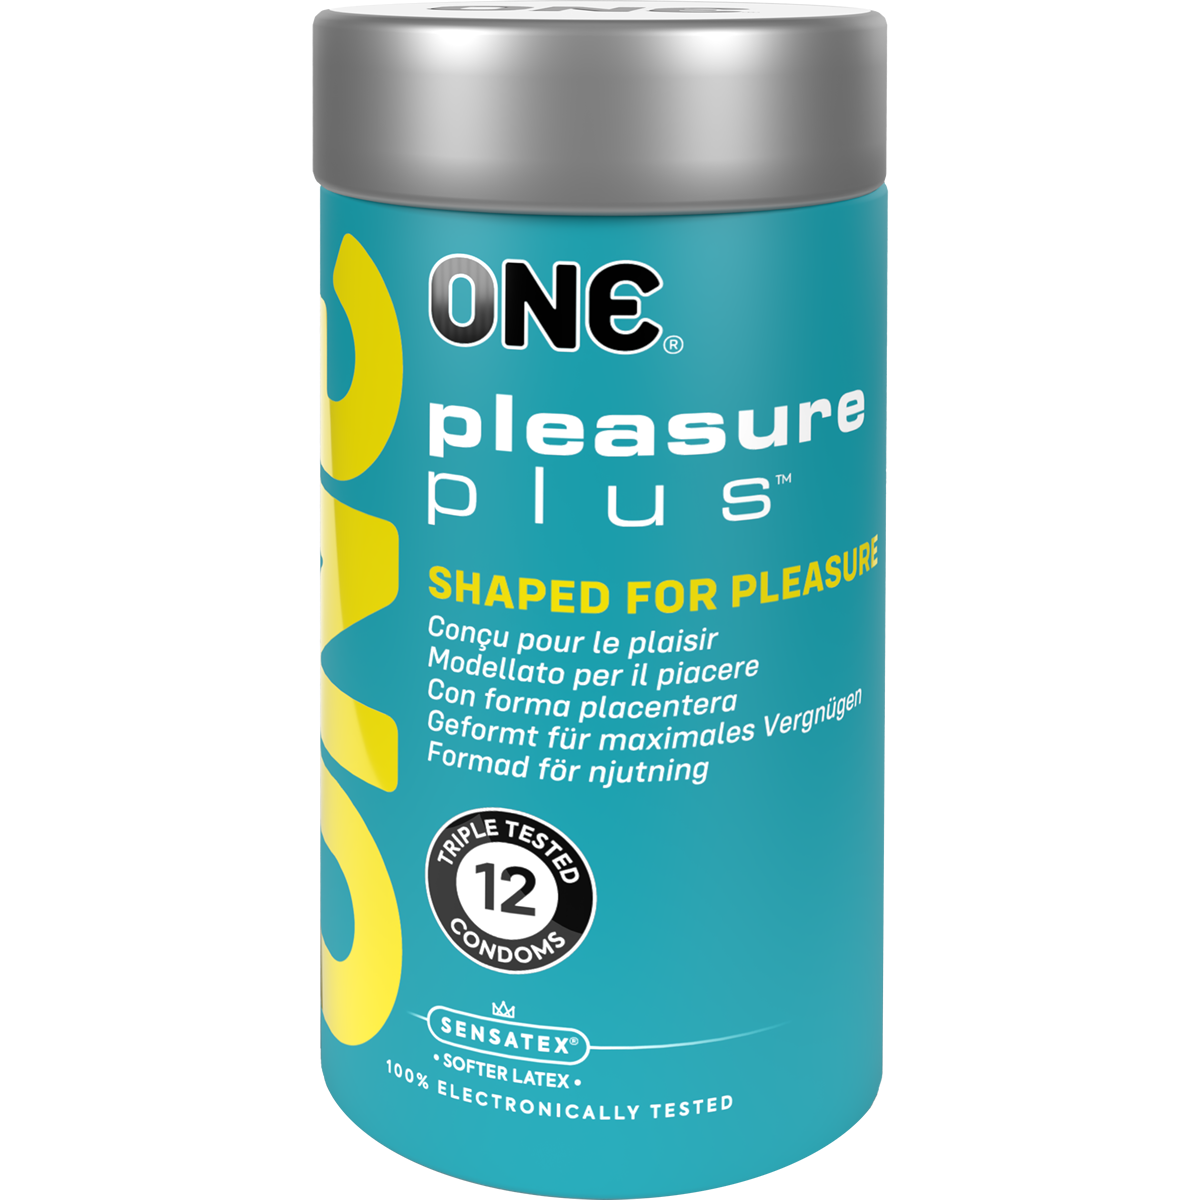 ONE «Pleasure Plus» 12 special shaped condoms with pleasure pouch (ribs inside!) - vegan & without harmful ingredients